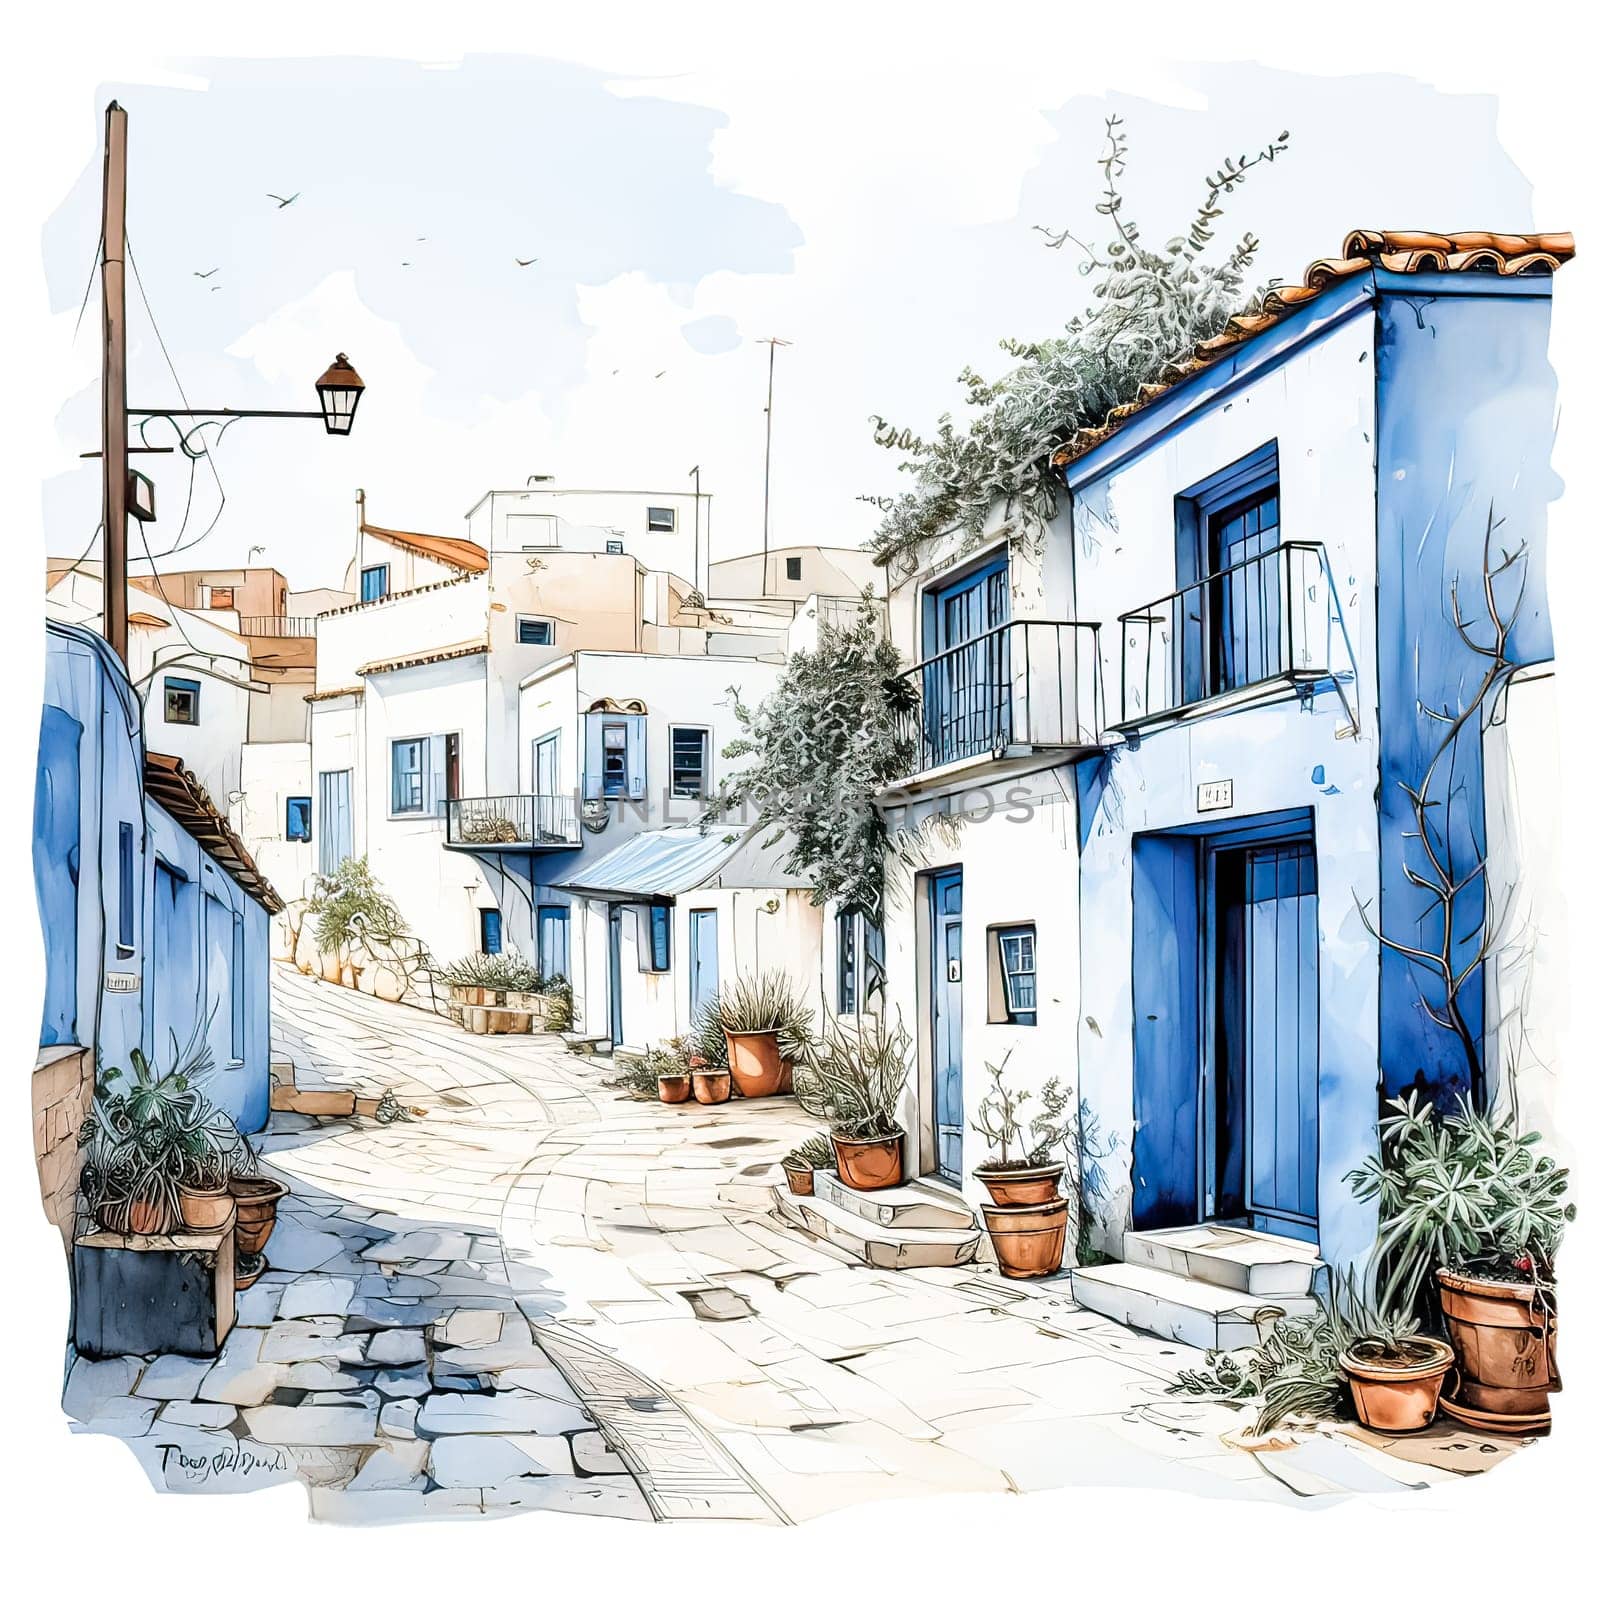 Watercolor sketch showcases charming Moroccan style houses on lush streets in a scenic landscape by Alla_Morozova93